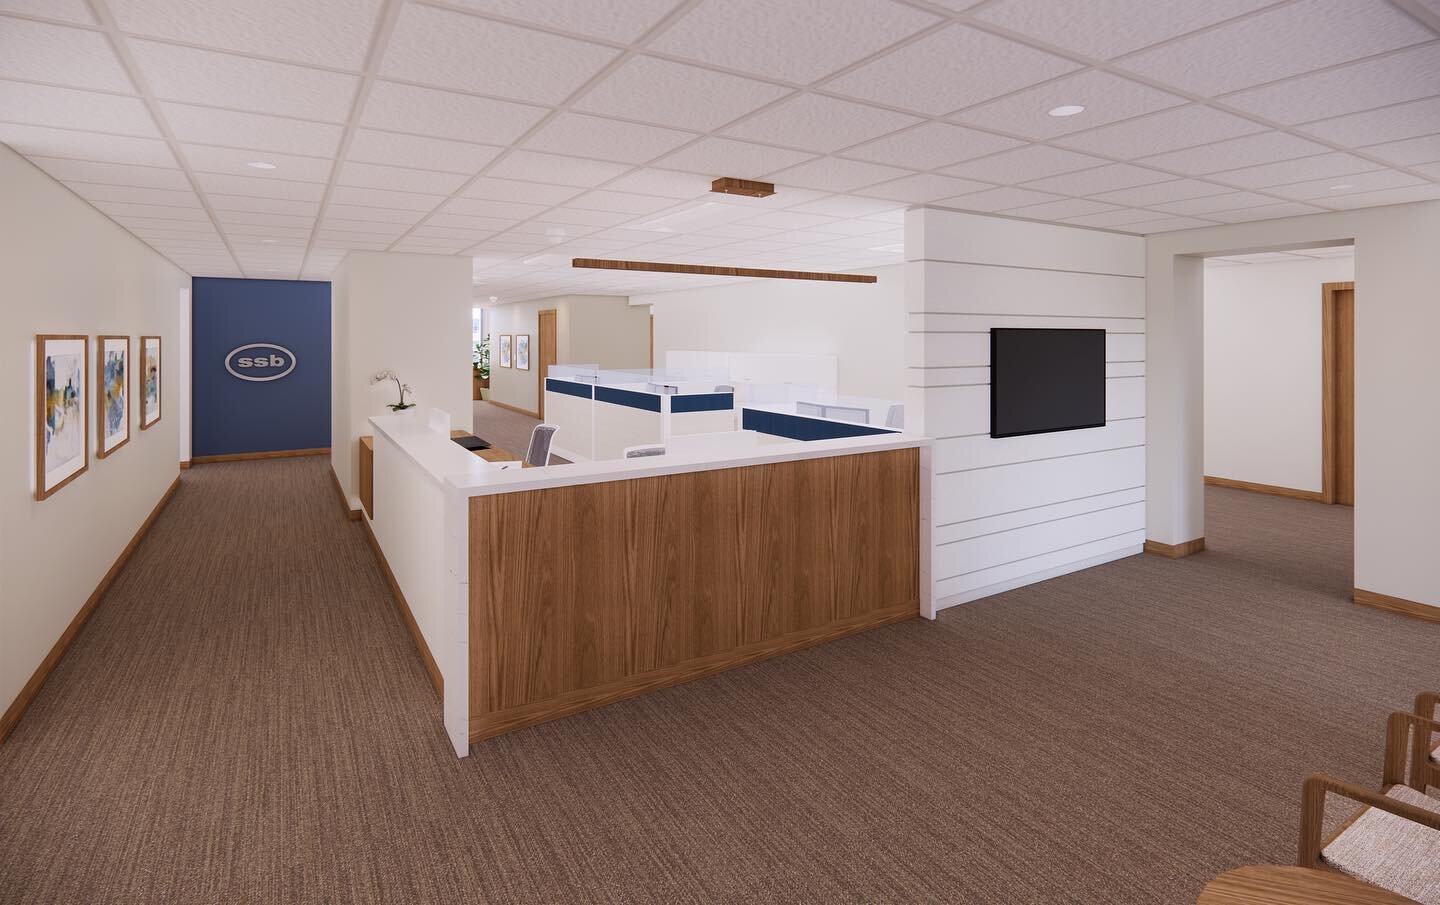 This month kicks off interior renovations at State Street Bank. The renovation of the second level loan department will provide a more functional layout to meet the growing needs of the bank while also providing an overall aesthetic update.

The scop